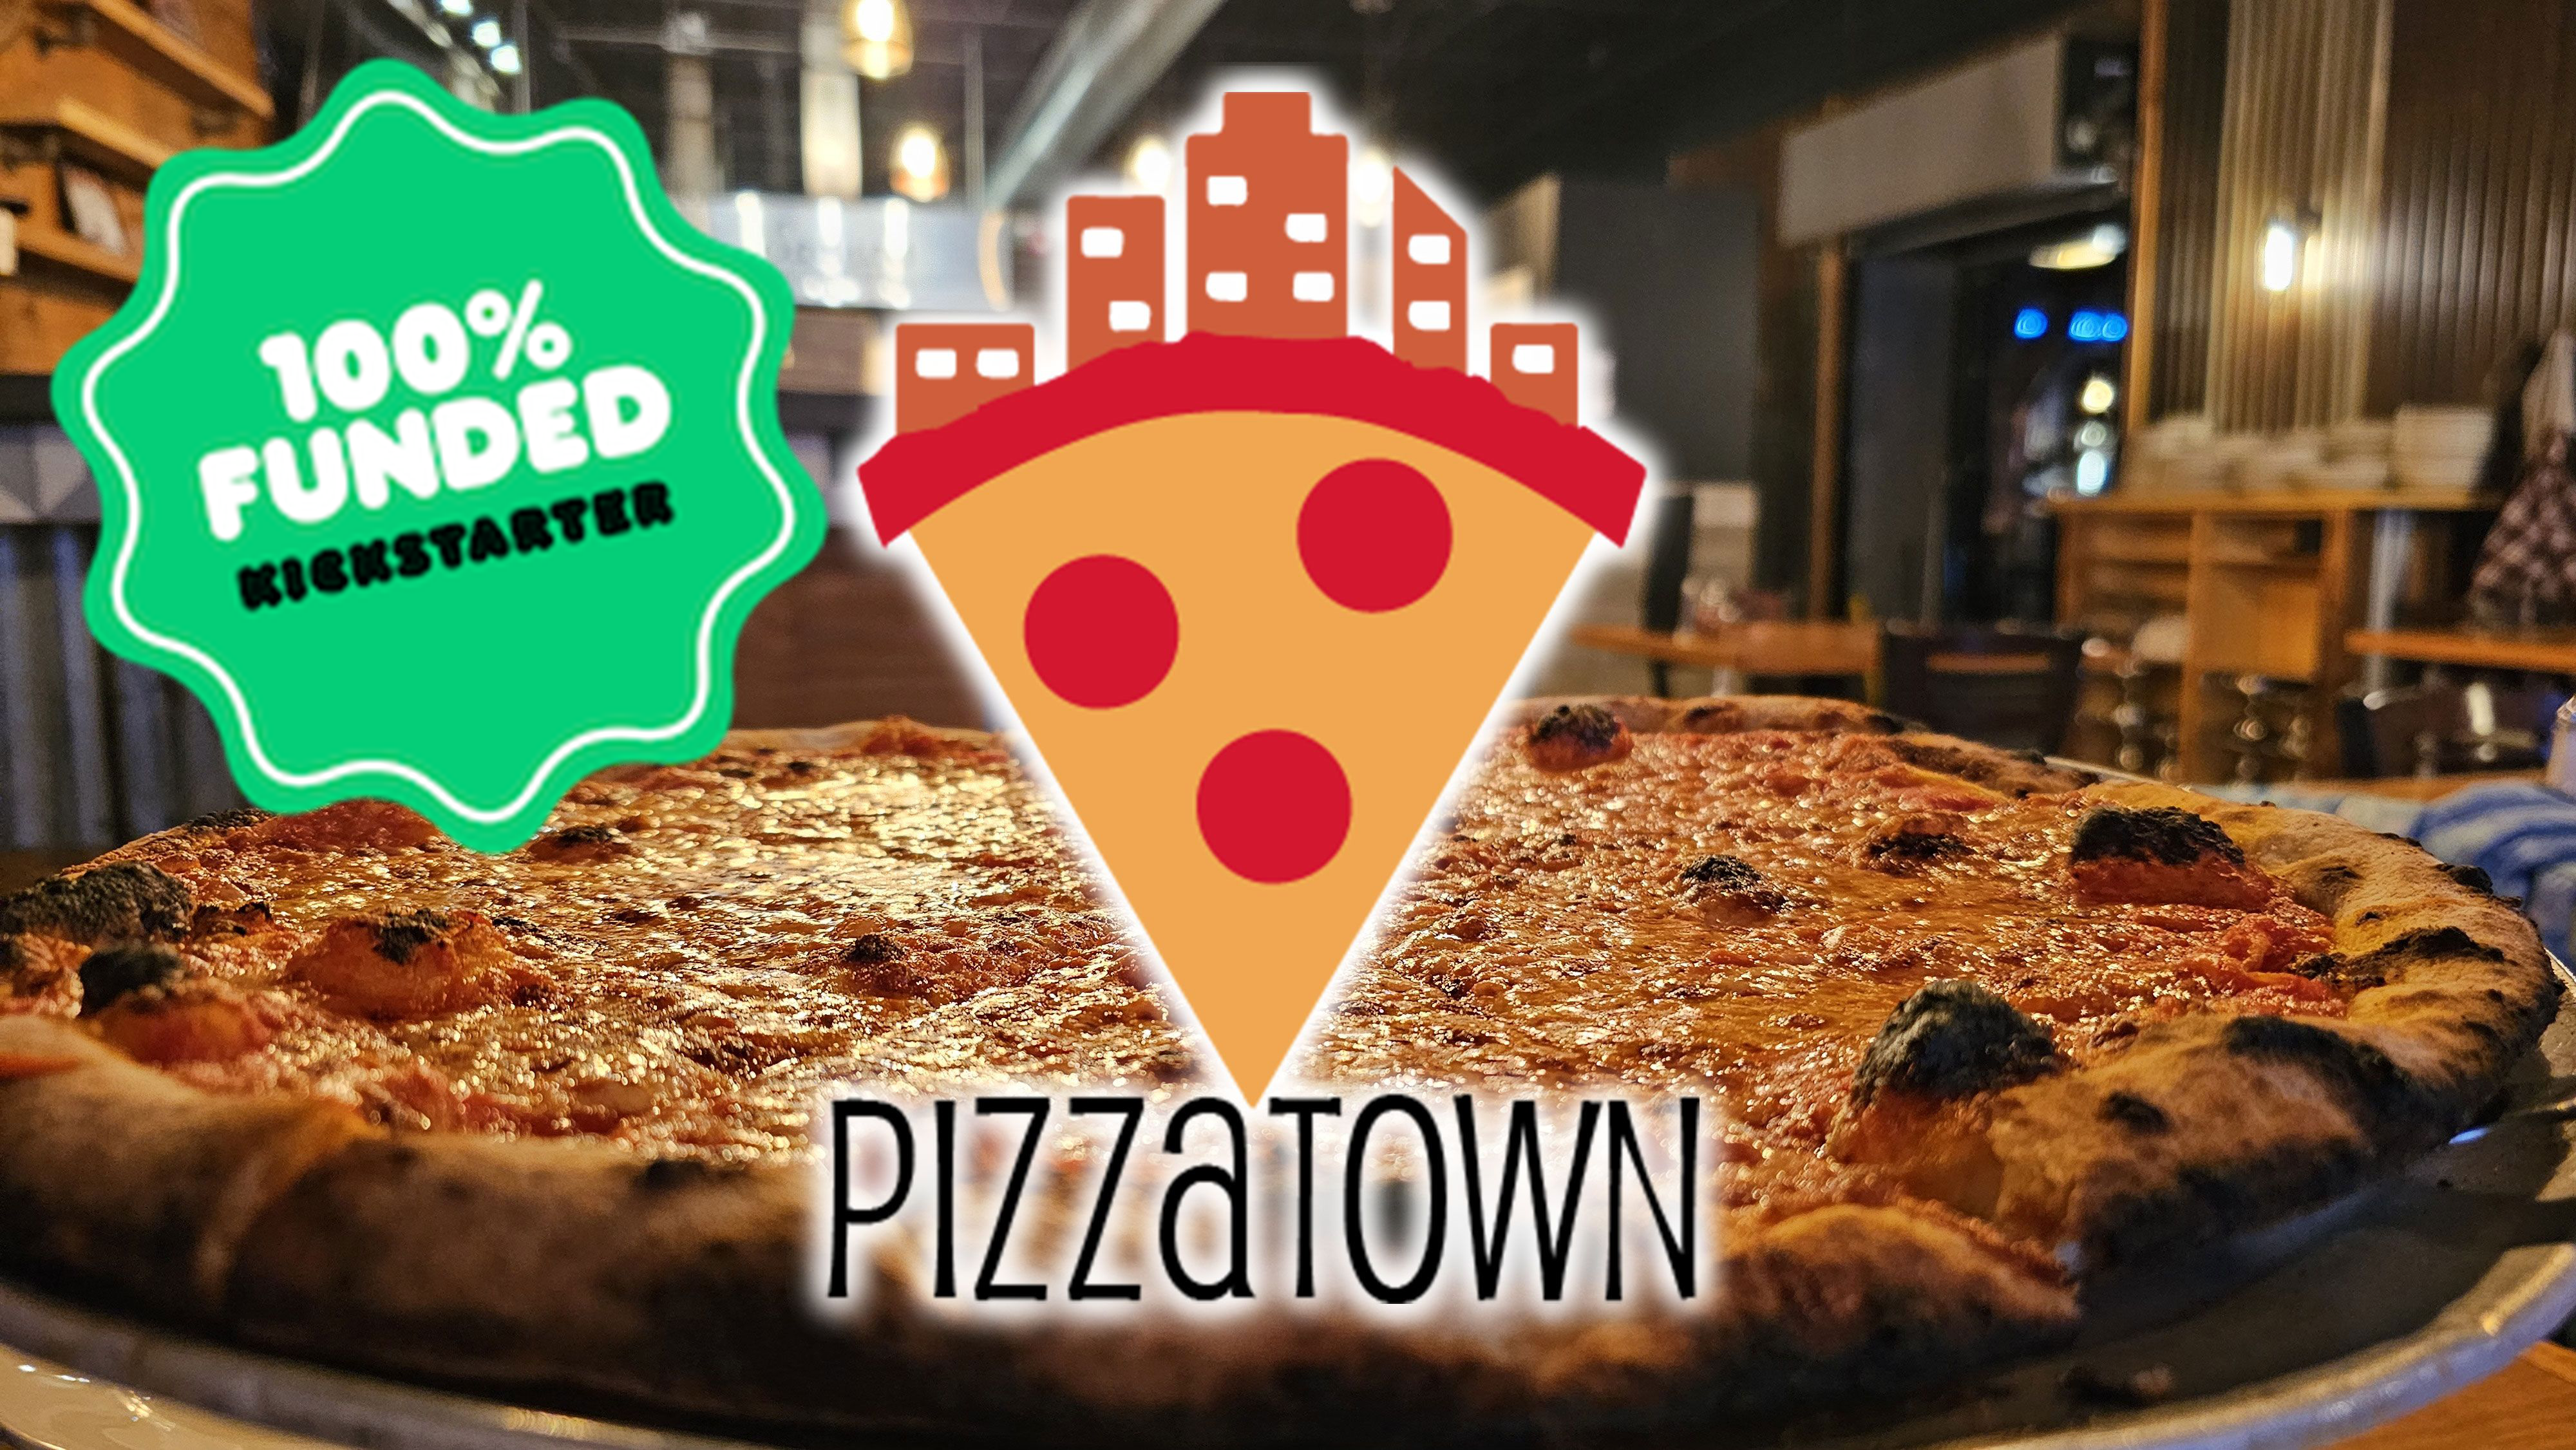 Pizzatown-documentary-kickstarter-campaign-Torrington-CT-community-pizza-culture-support-launch-February-9th-funded Becky Brennan - Article - BISTRO BUDDY | Food & Drink Community Network Registered Users, Becky Brennan Becky Brennan's Profile